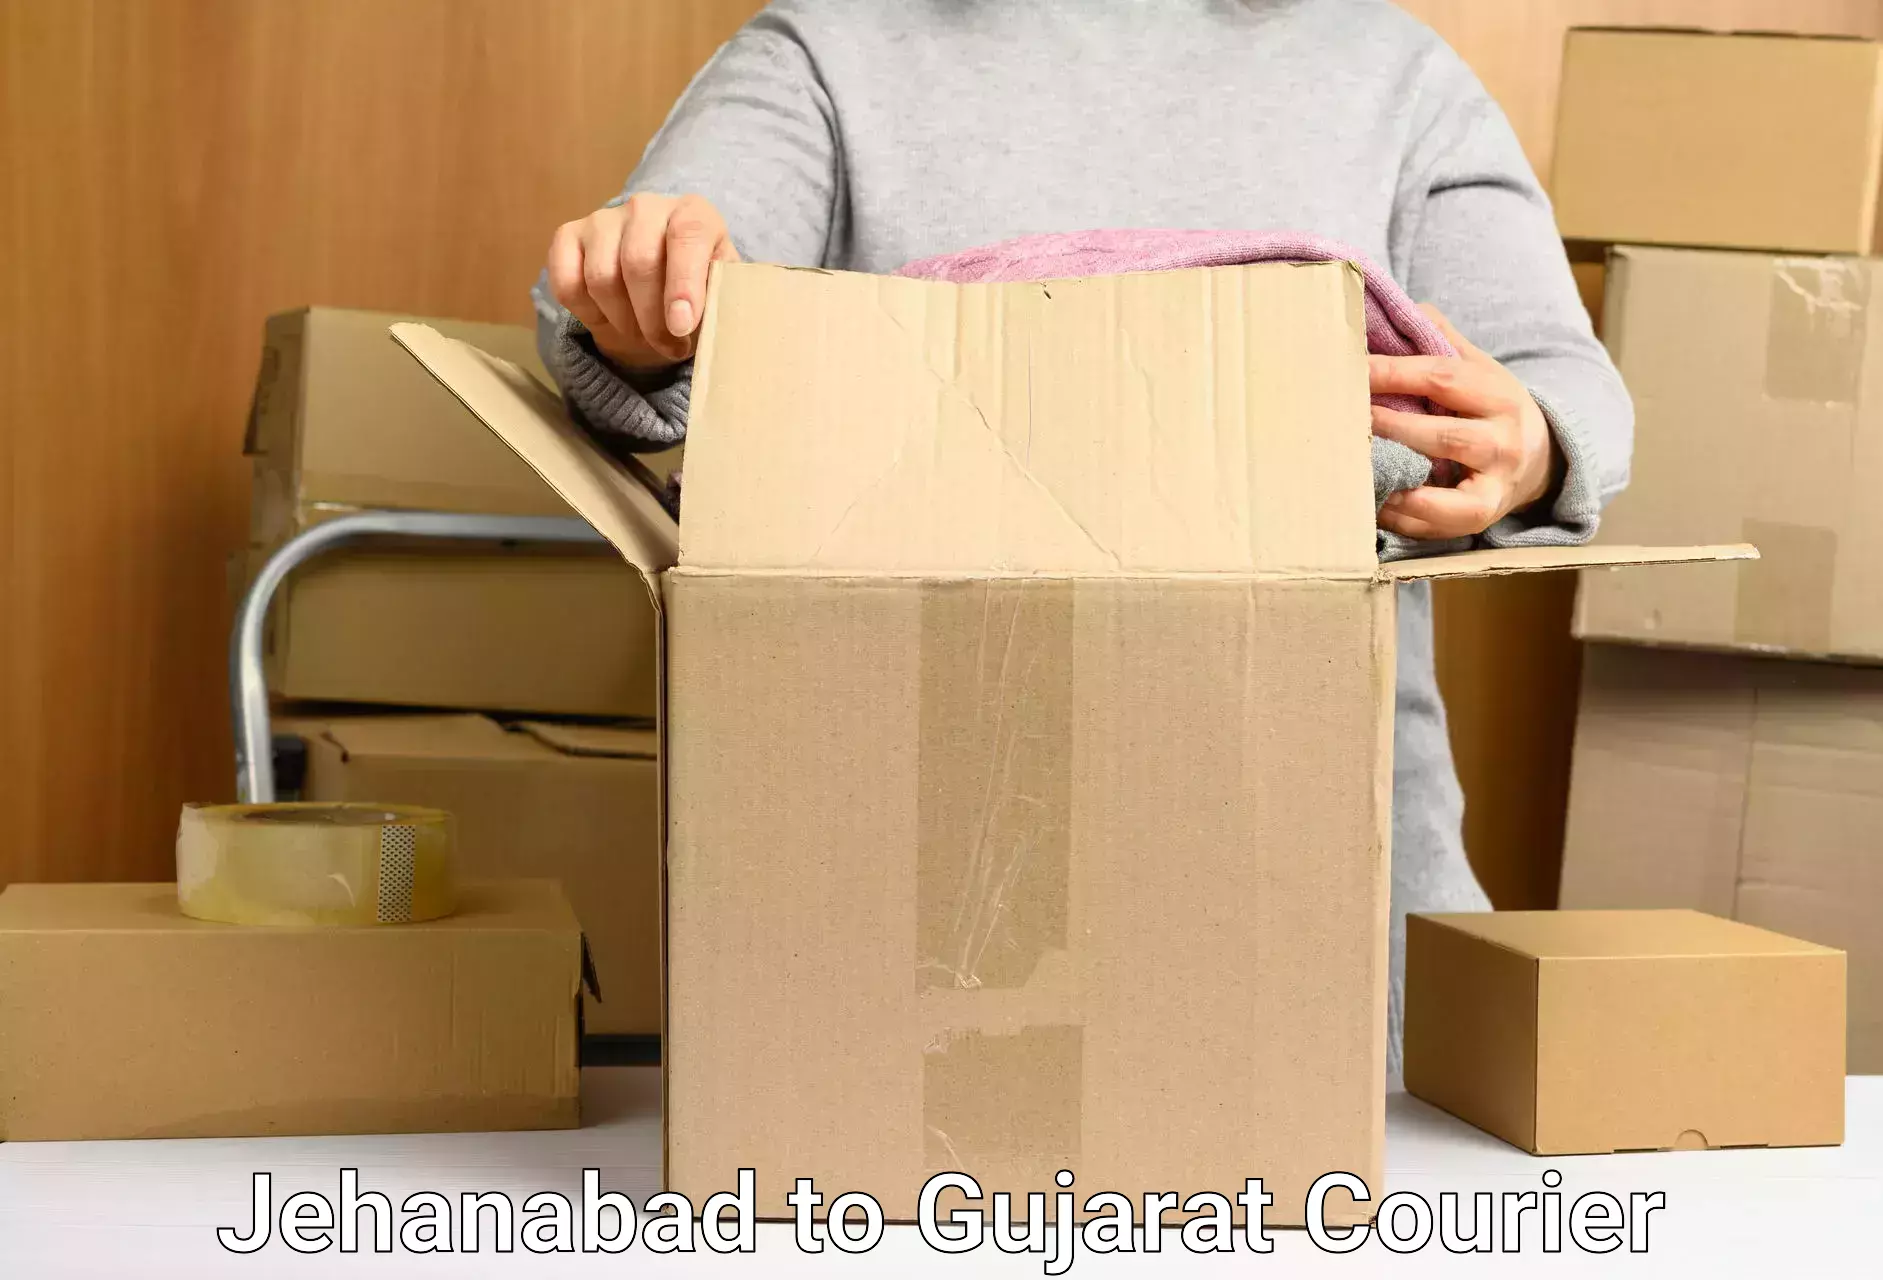 Global courier networks Jehanabad to Bhuj